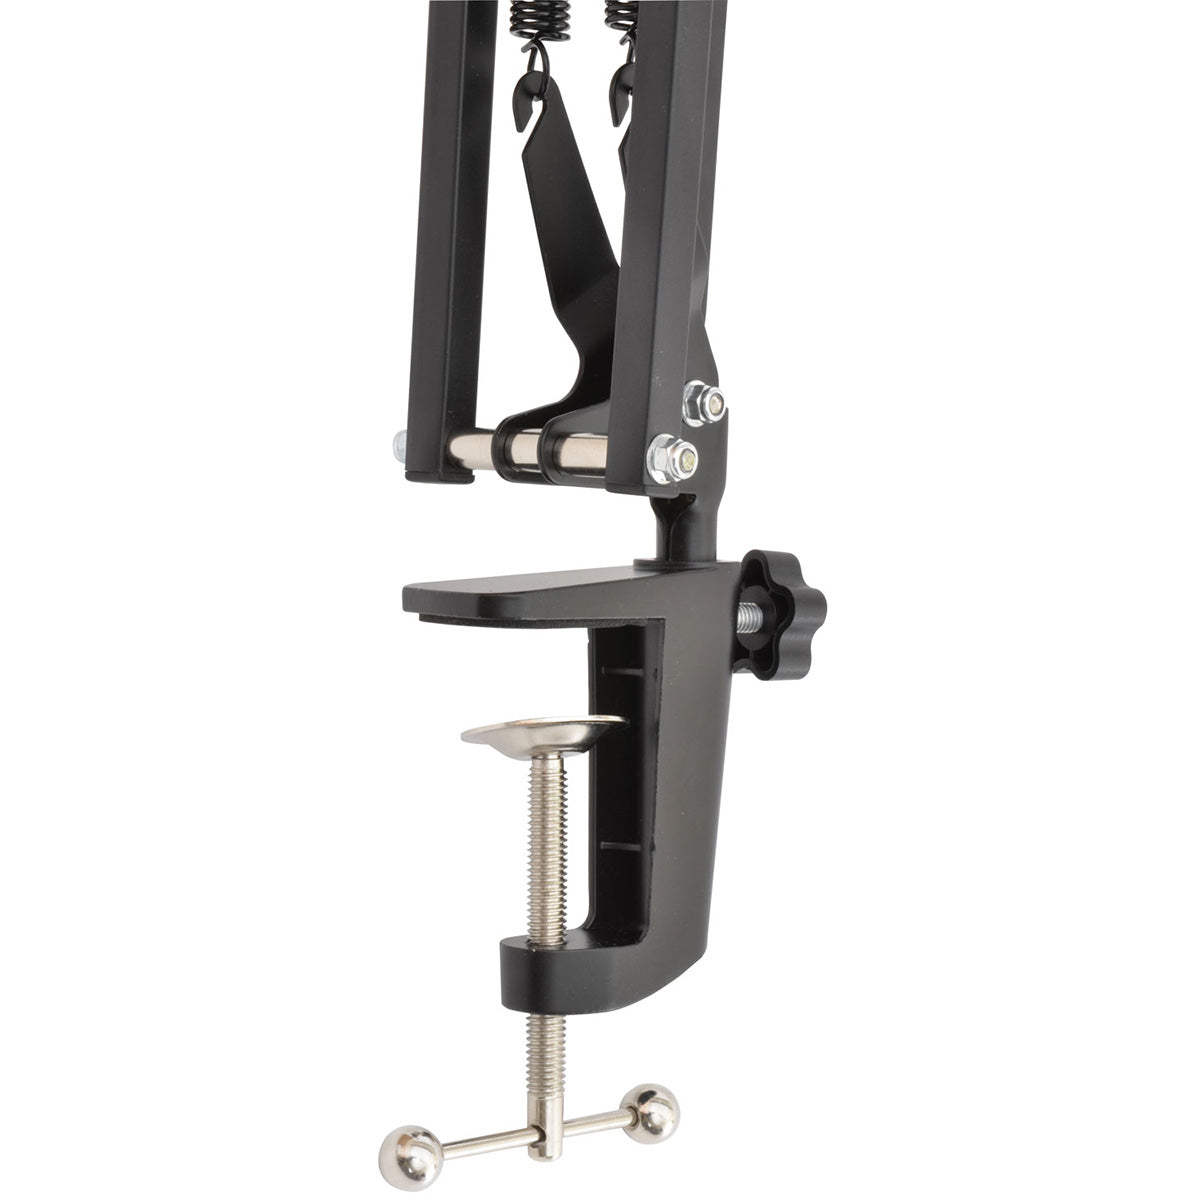 Citronic Large Microphone Boom Arm (180002)